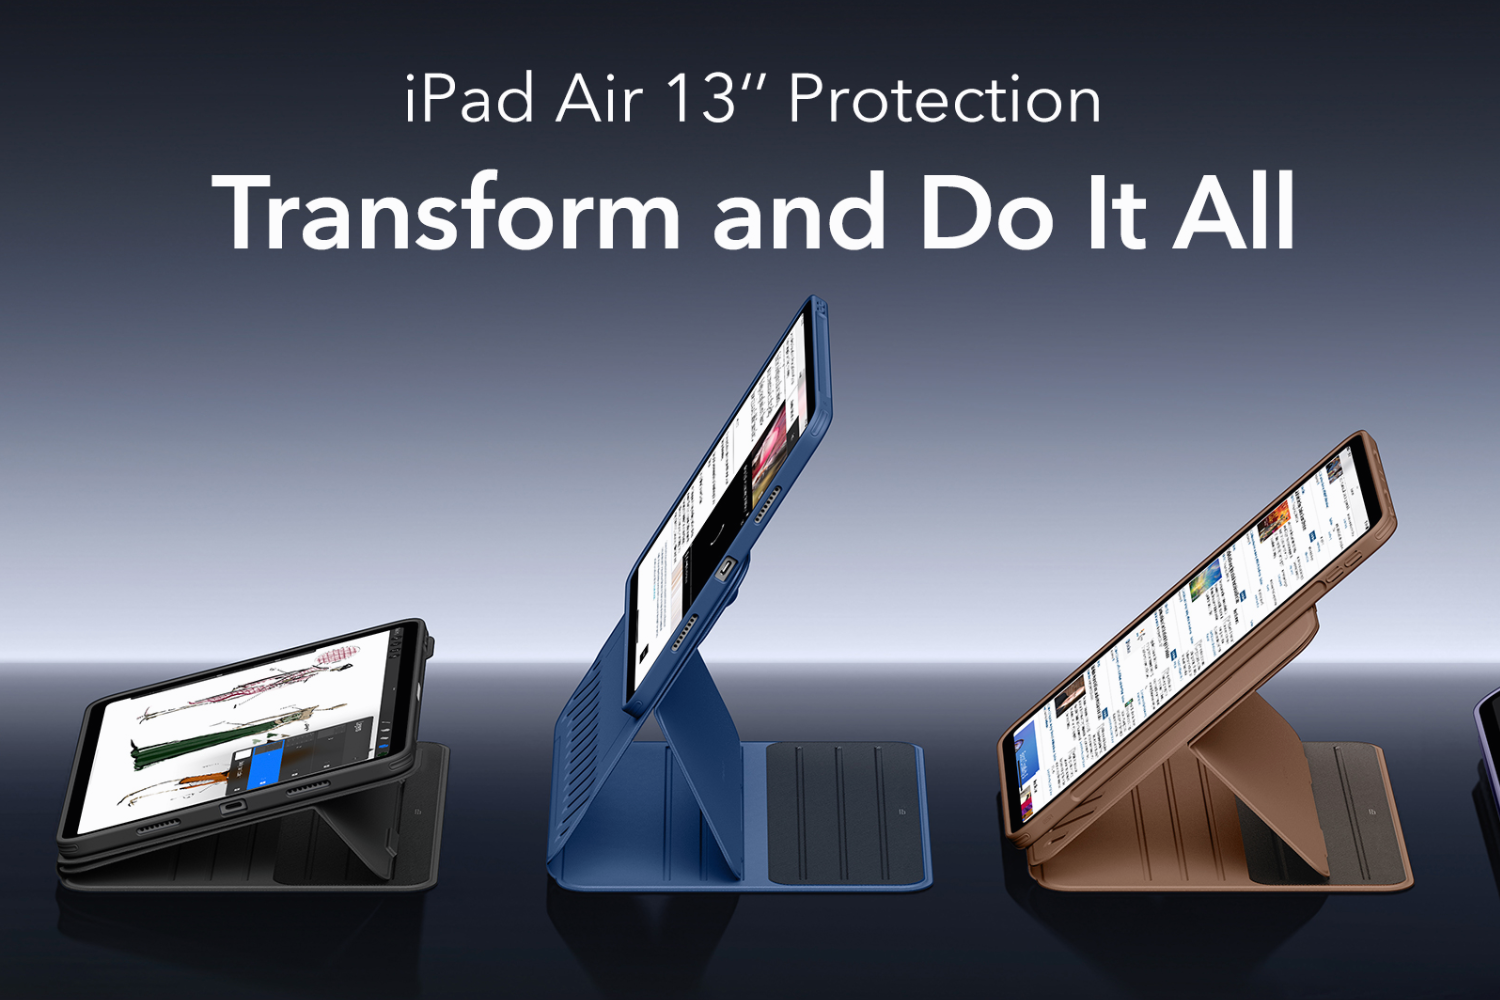 Image Credit–ESR - Case maker already offering options for Apple's alleged 12.9-inch iPad Air on Amazon